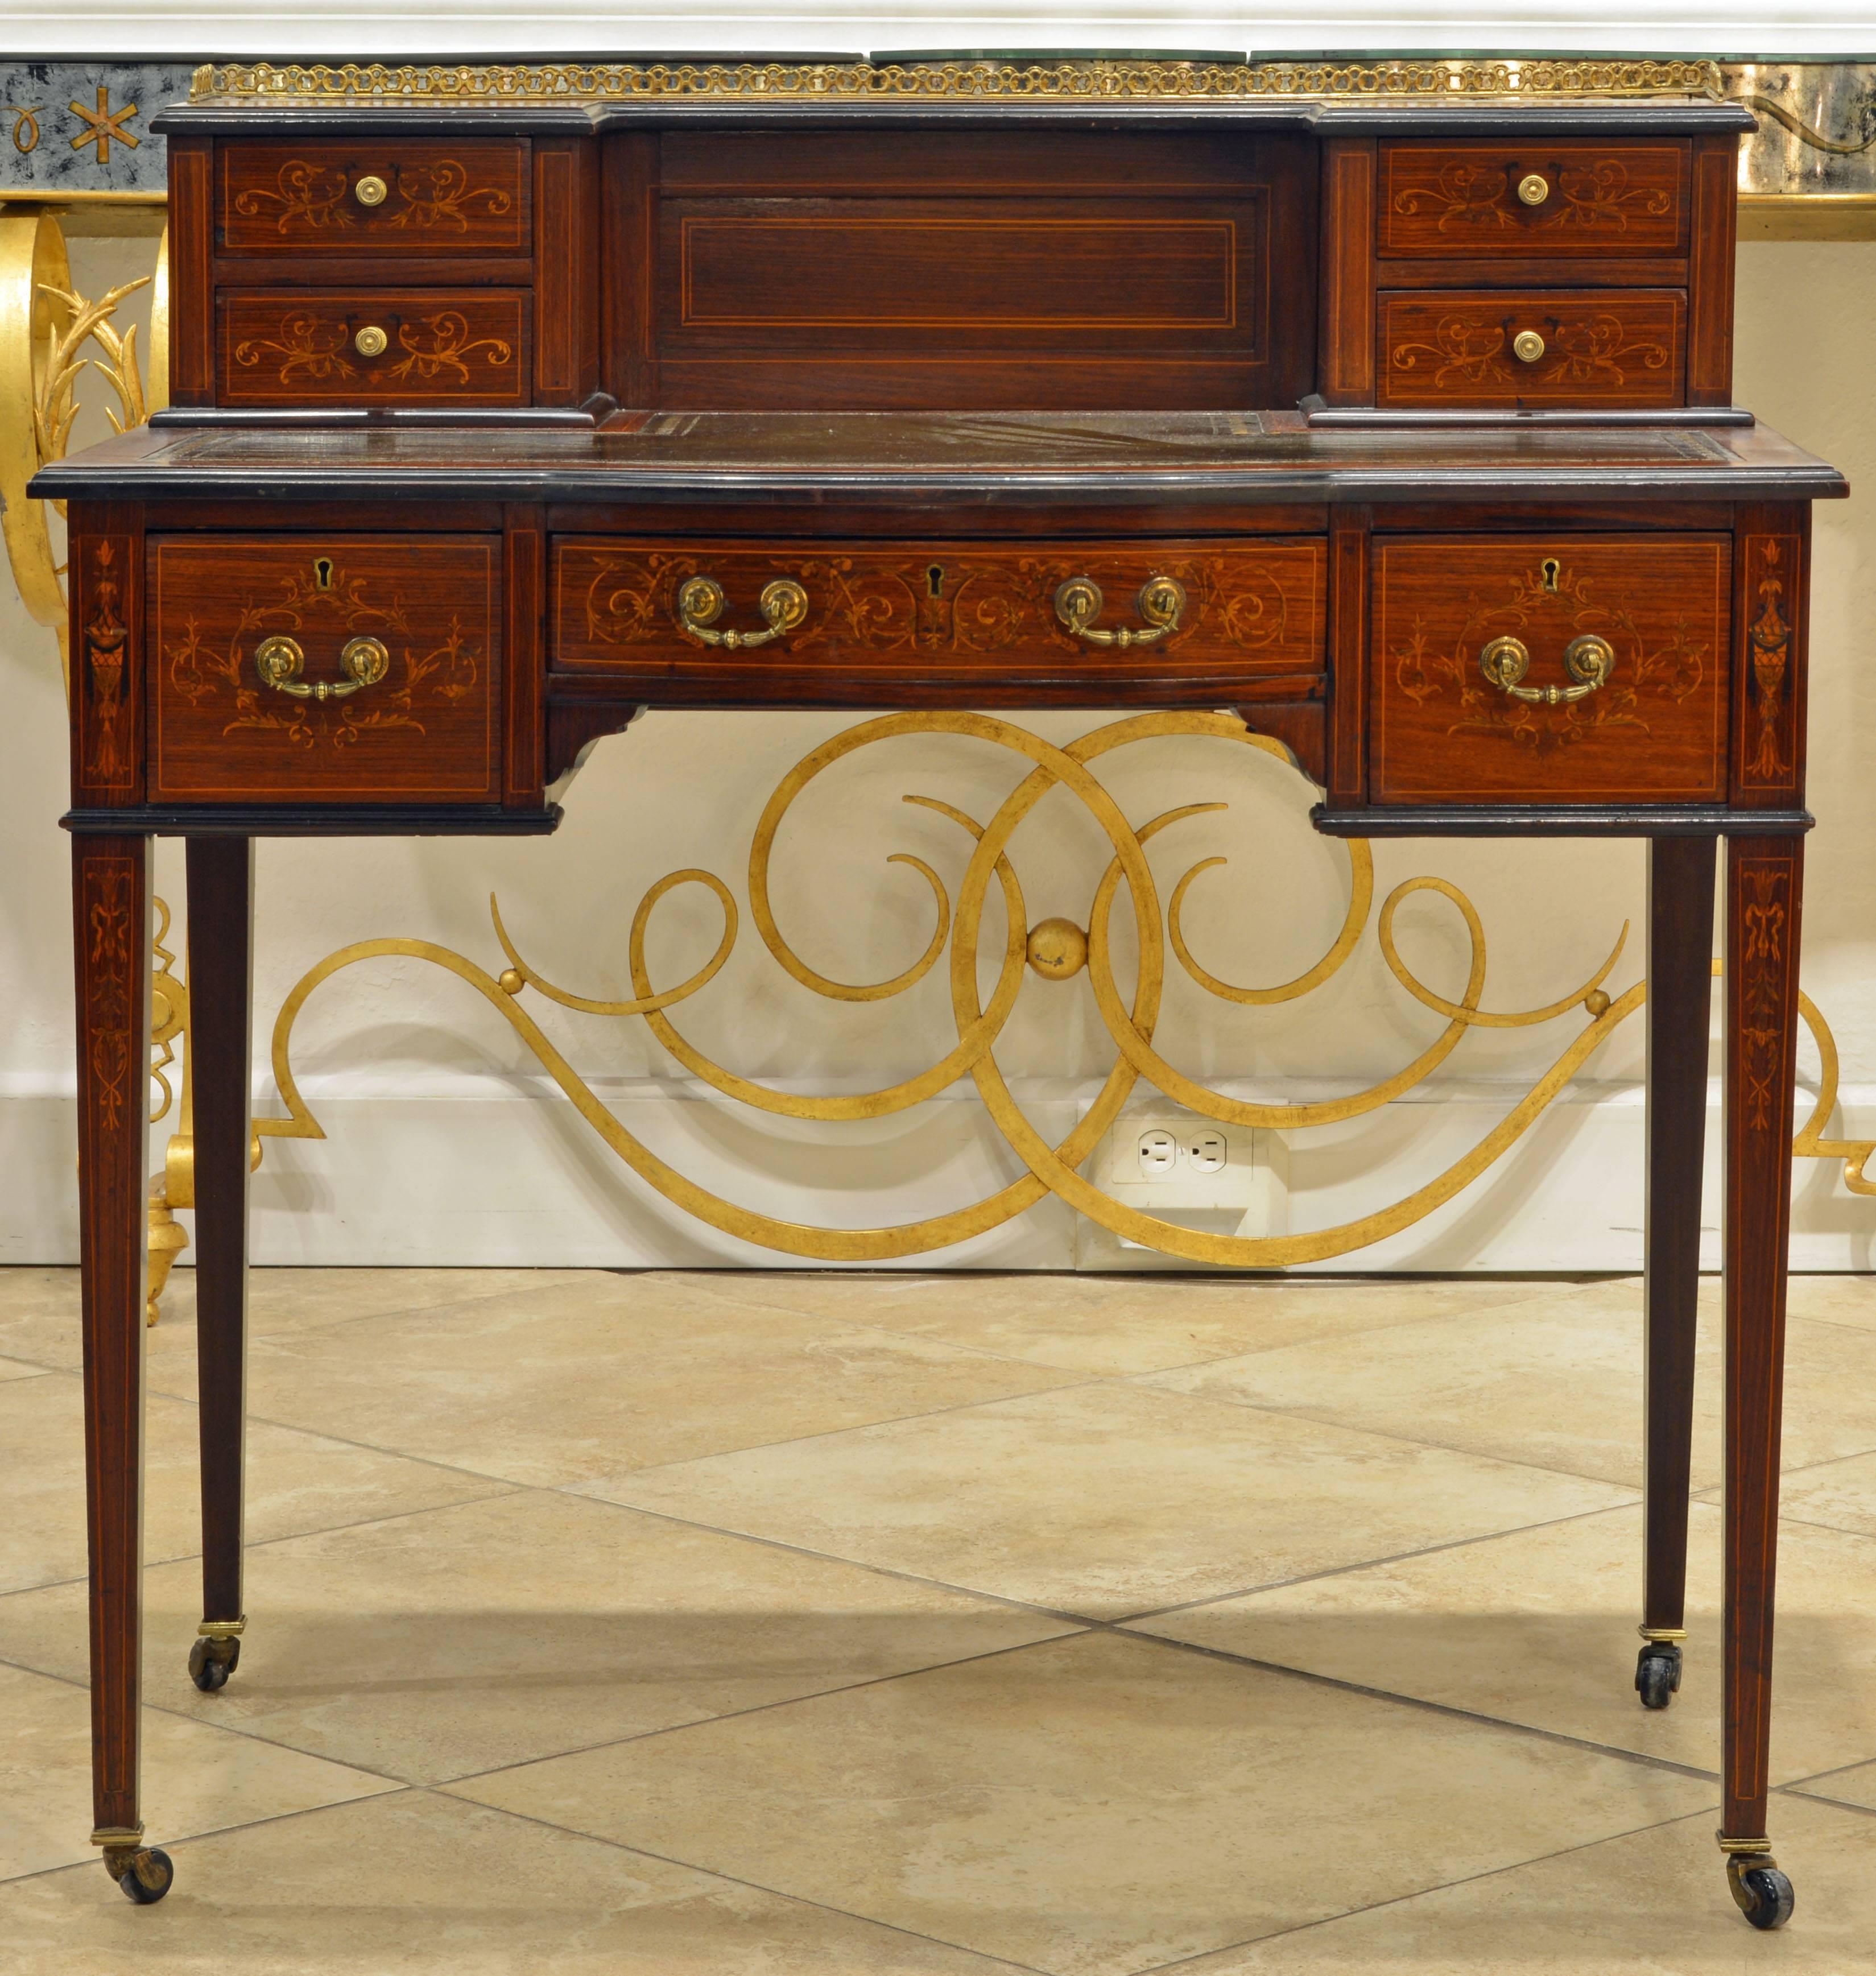 A lovely Carlton House style writing desk with elaborate overall inlay, gilt tooled leather writing surface and bronze gallery. It evokes Downton Abbey associations.